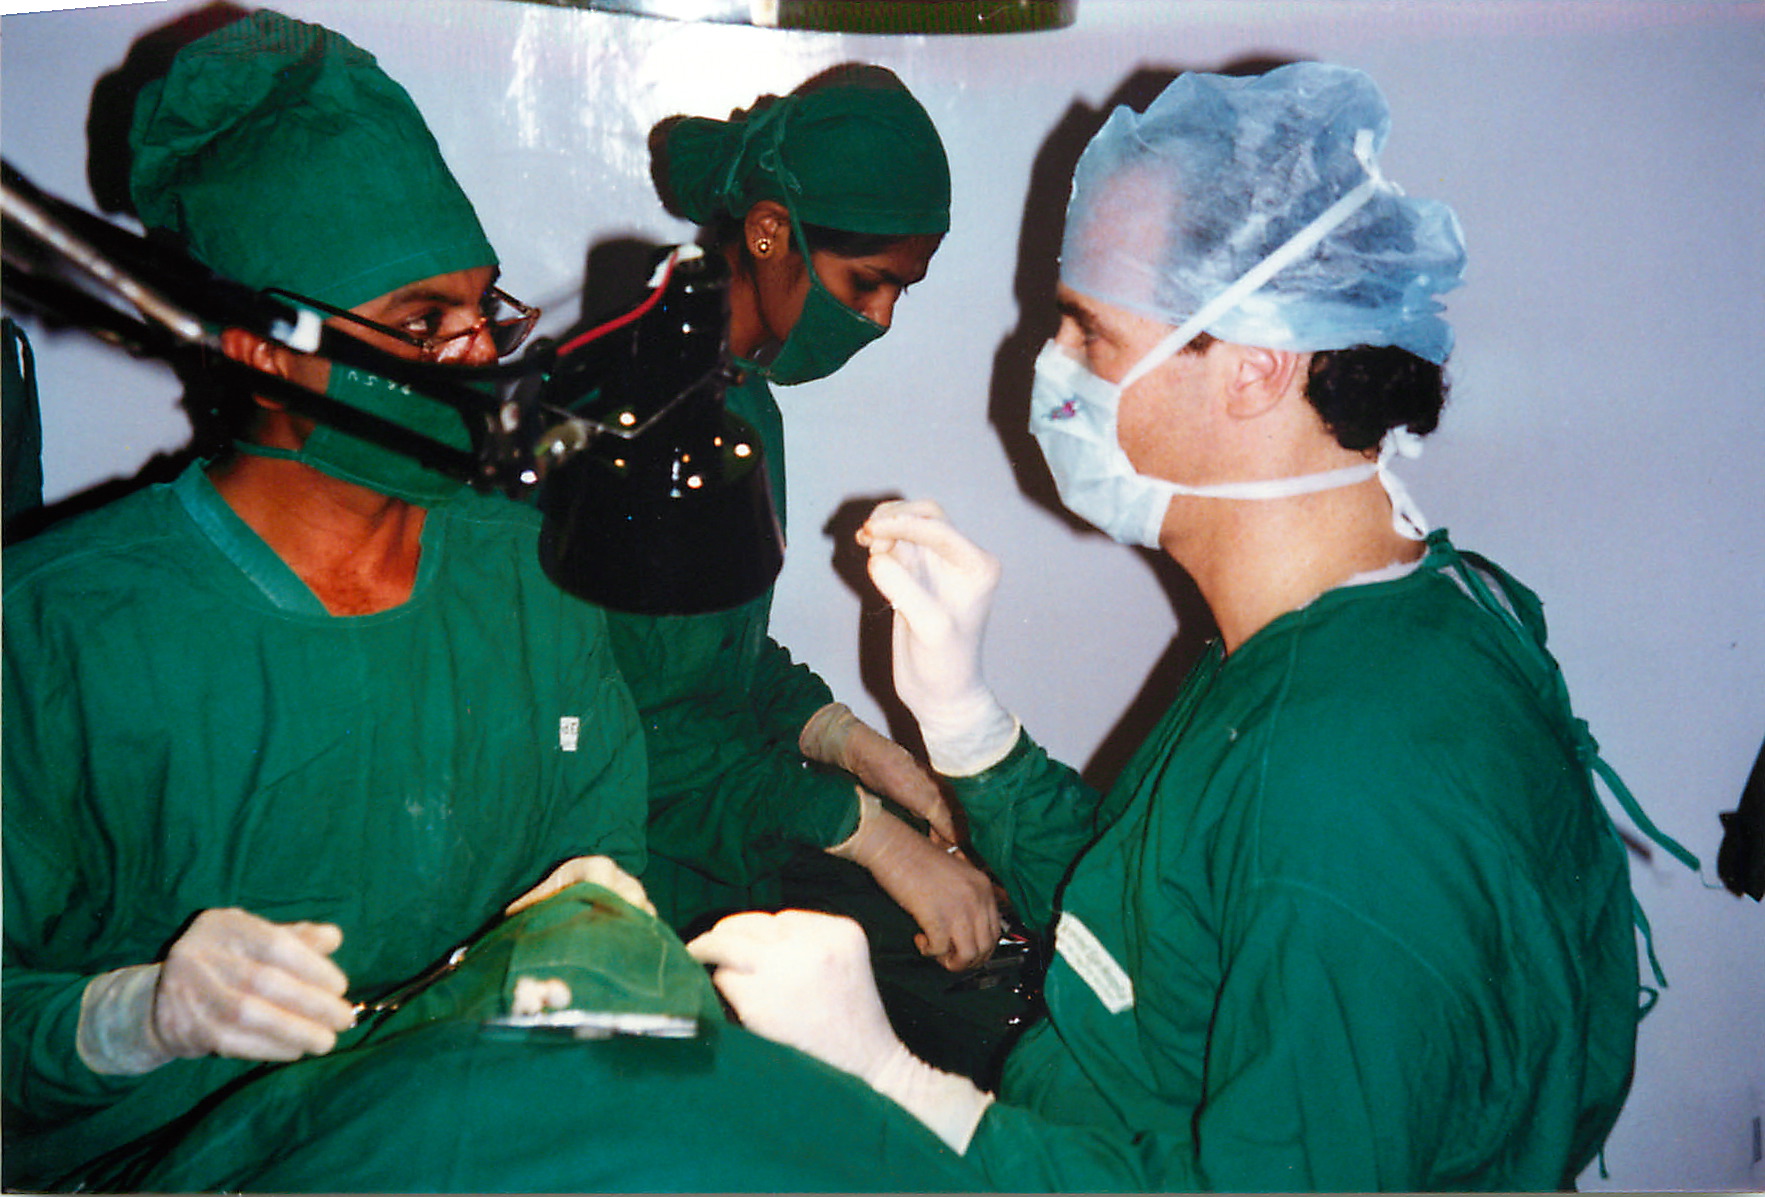 Dr Weiss instructing other doctors in India during a cataract surgery procedure